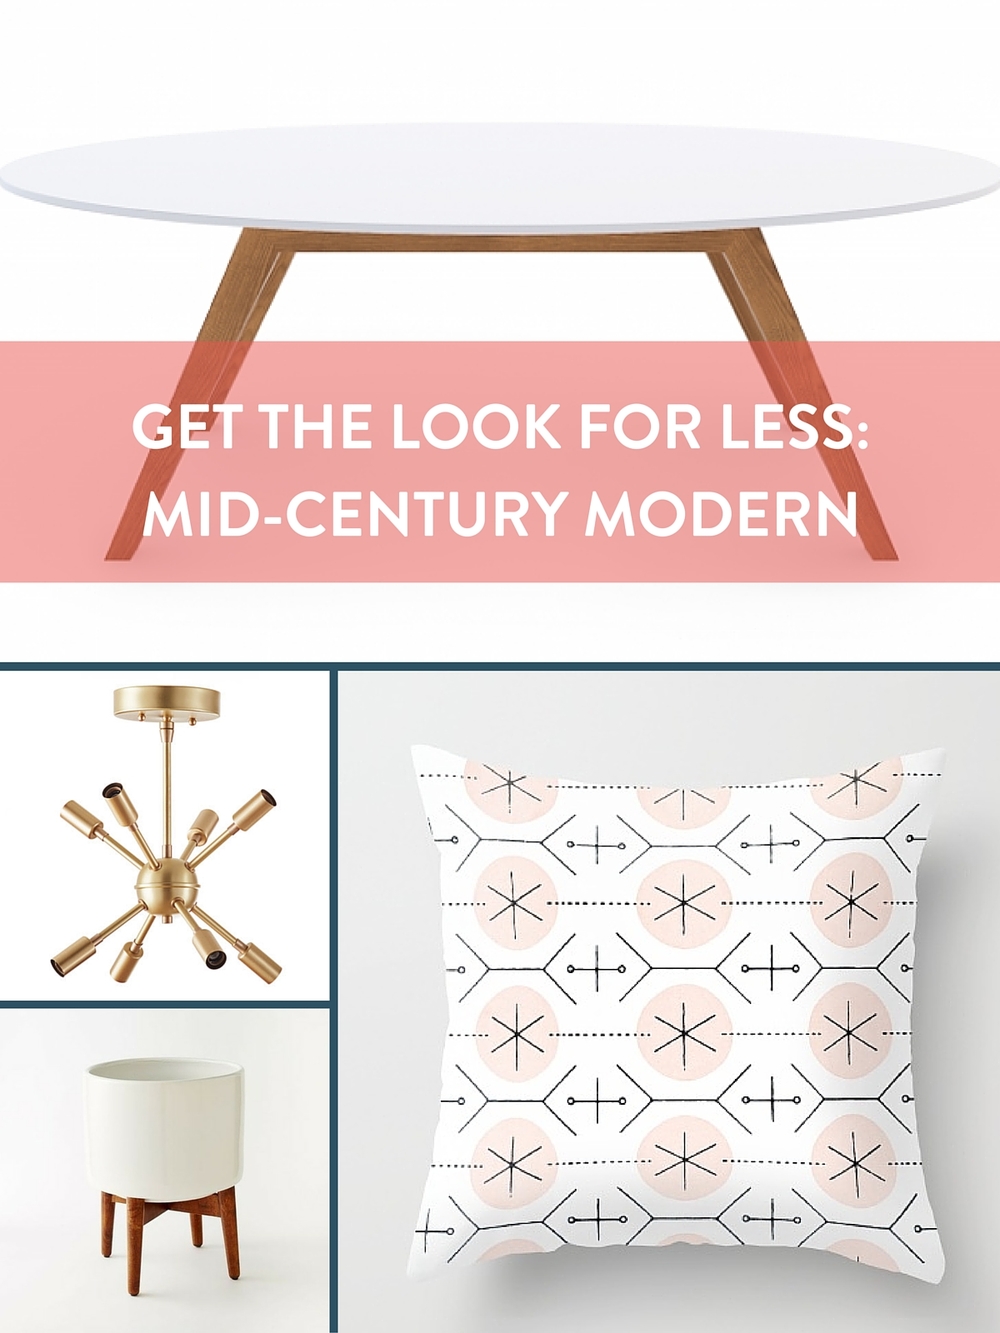 Get the Look for Less: Mid-Century Modern